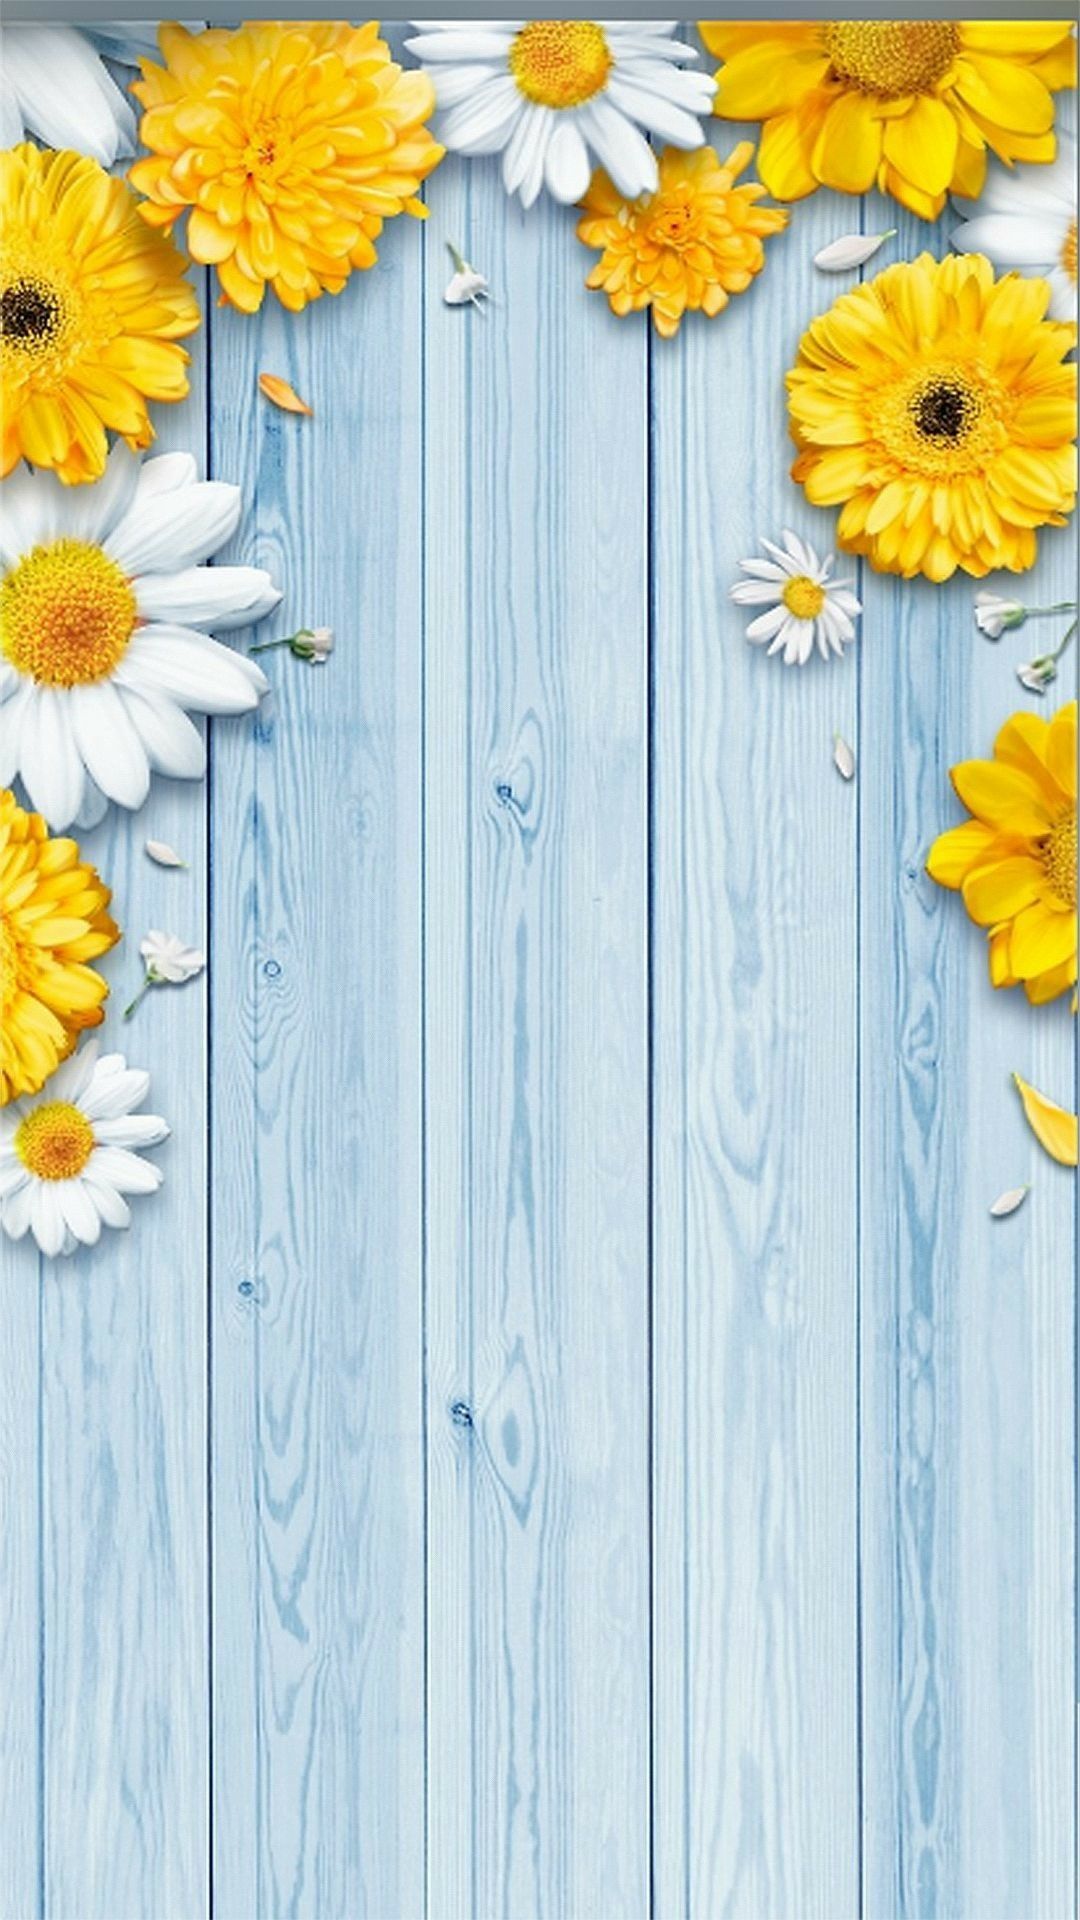 Wood and Flower Aesthetic Wallpaper Free Wood and Flower Aesthetic Background